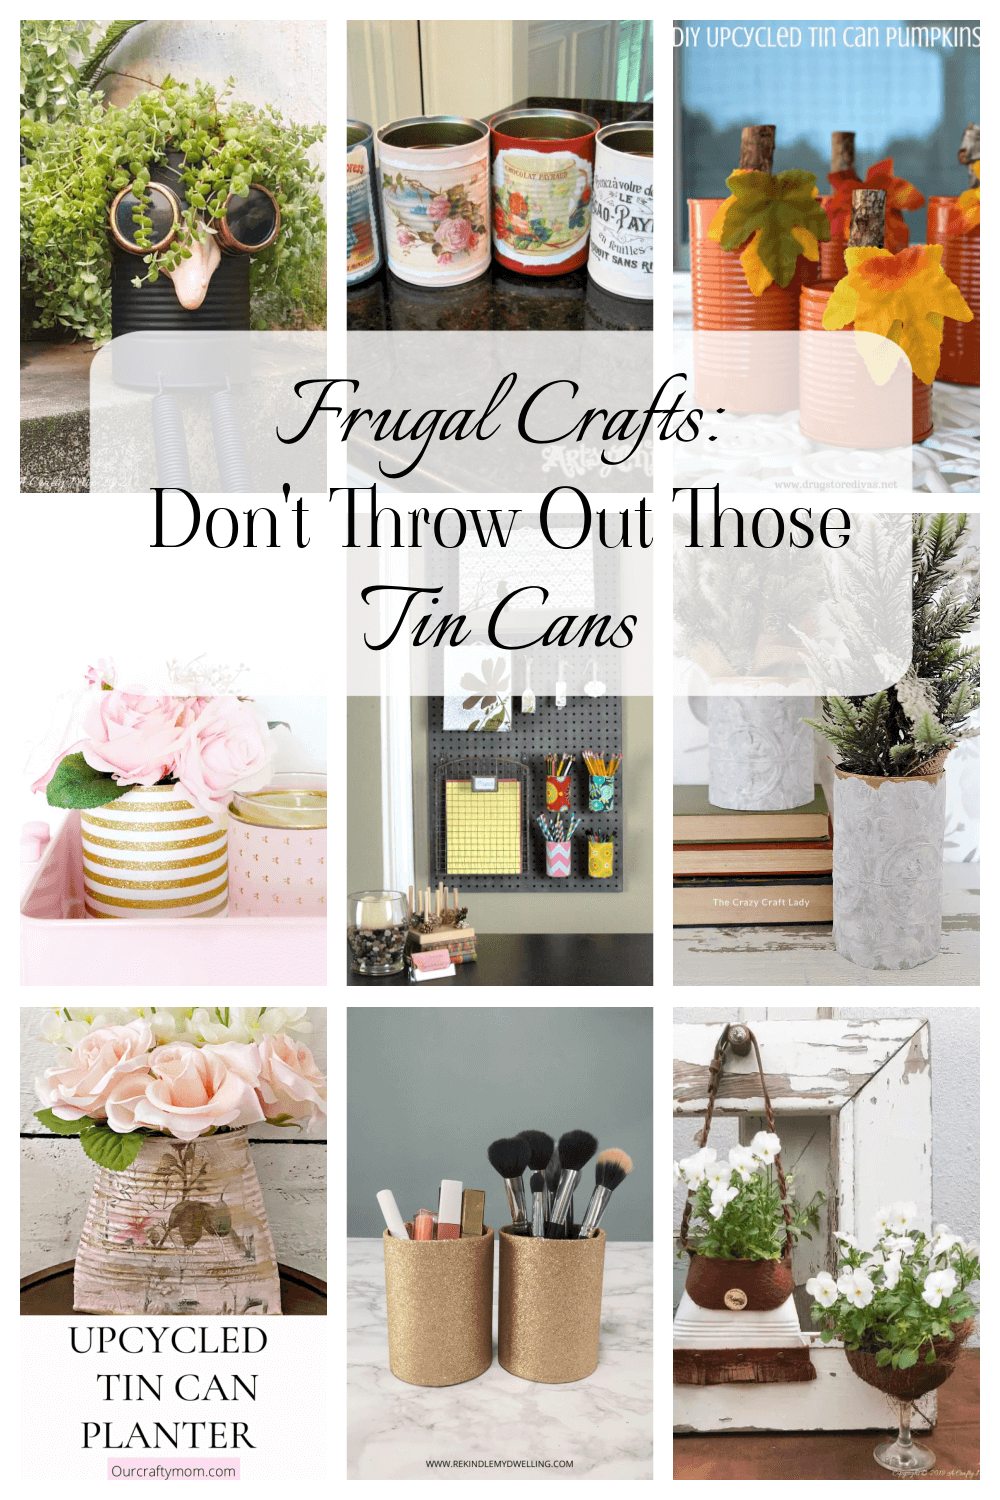 Frugal Crafts: Don’t Throw Out Those Cans